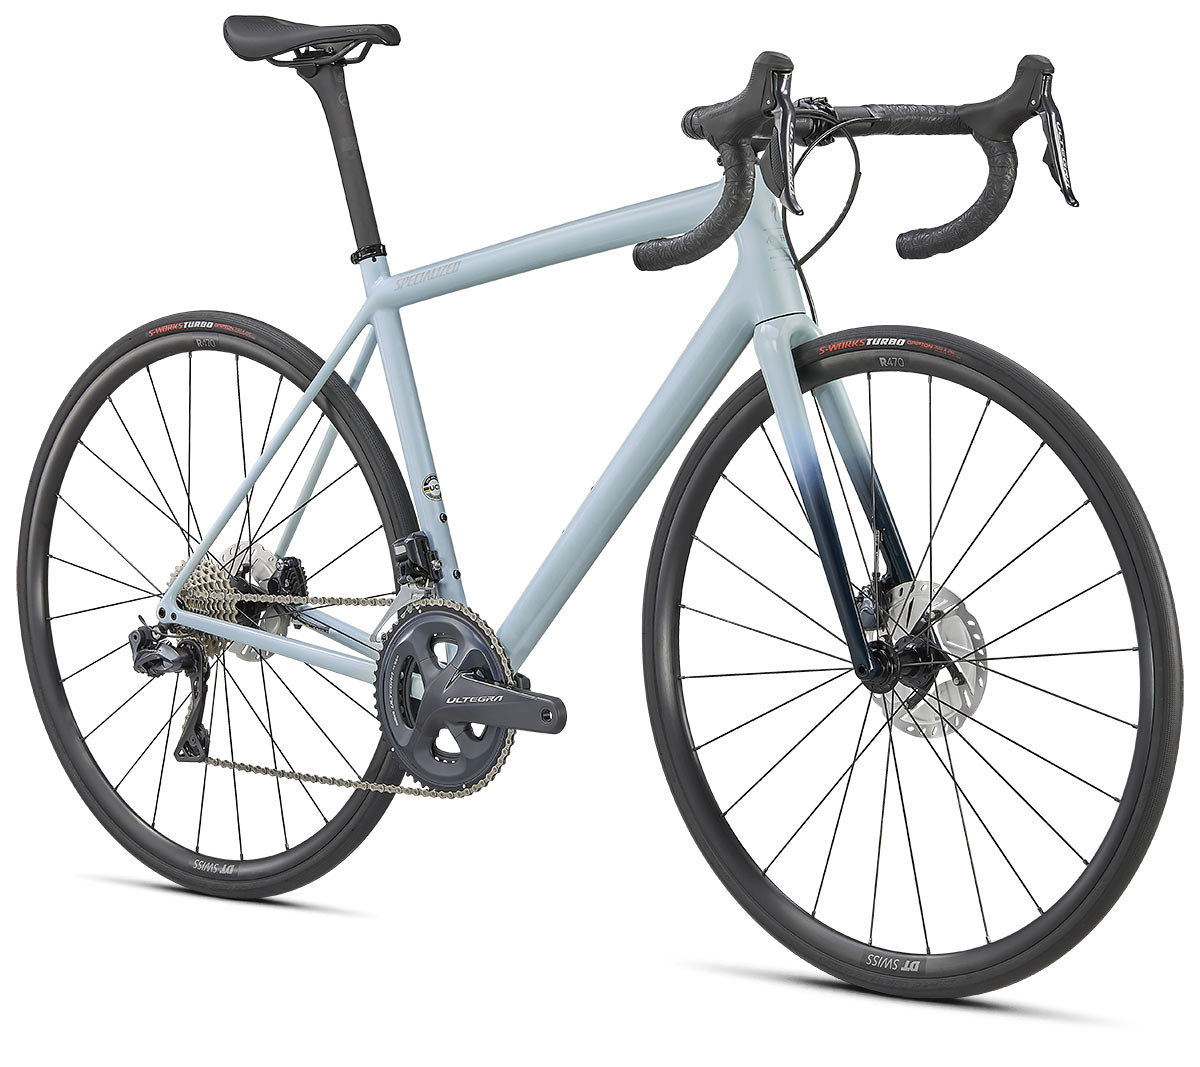 new specialized aethos lightweight carbon road bike in expert build trim and ice blue fade paint scheme